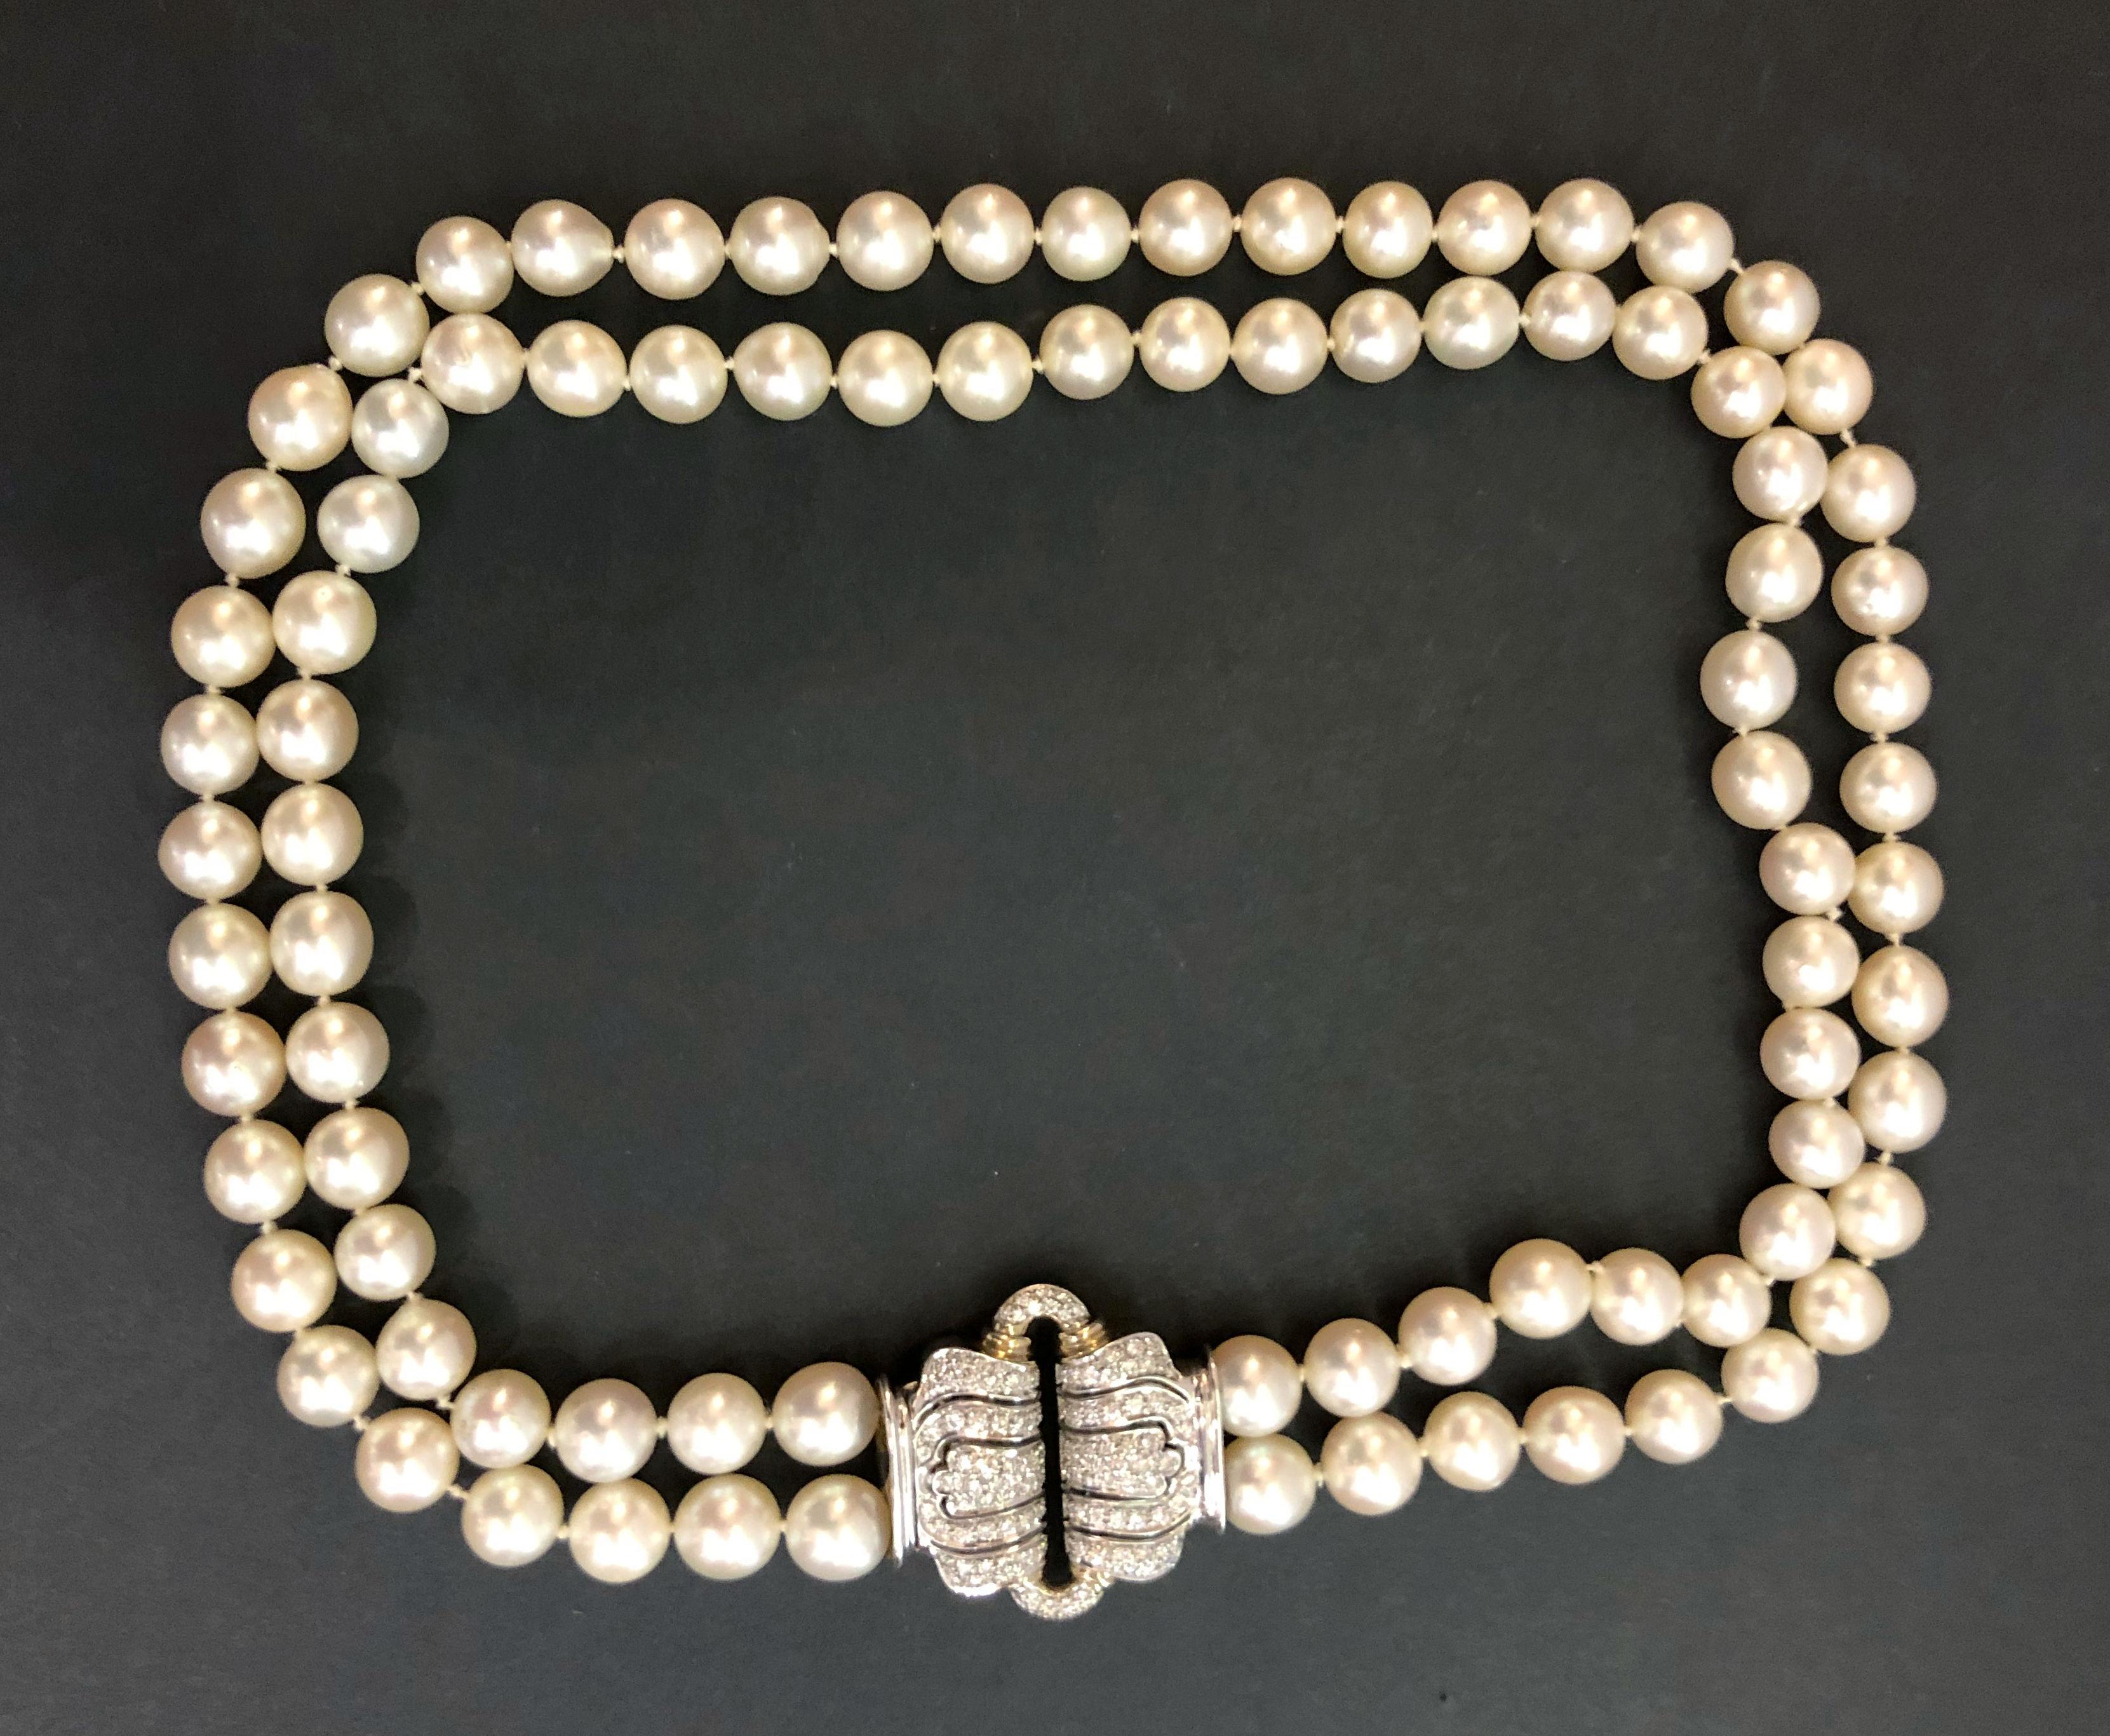 Vintage necklace with double strands of 9.5mm pearls, and white and yellow gold clasp with brilliant diamonds in pave setting, Italy 1980s
Length 48 cm